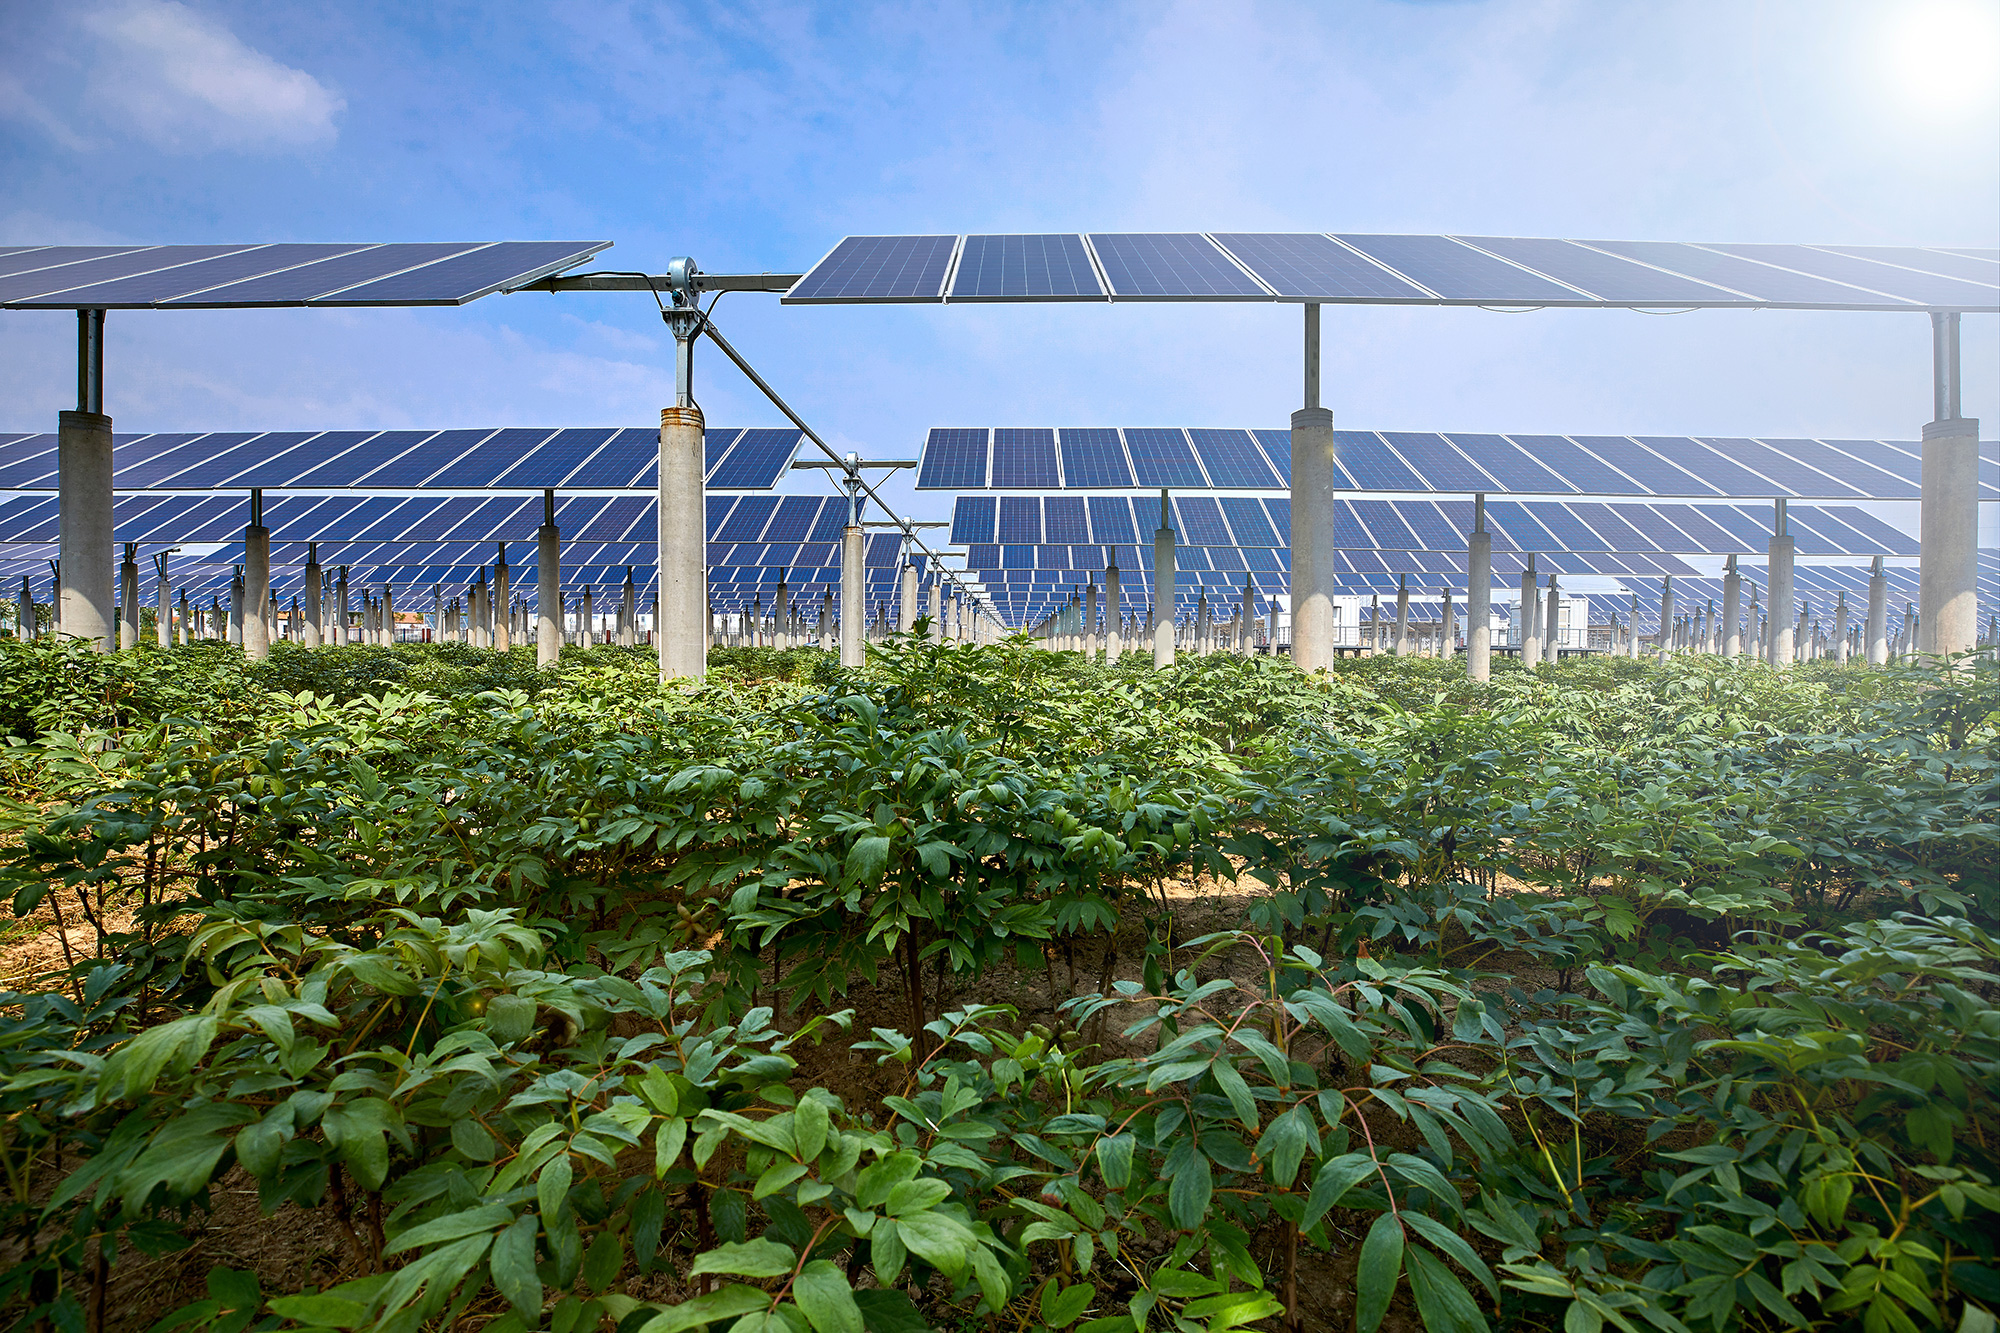 Agrivoltaics: Benefits of Solar Power and Agriculture